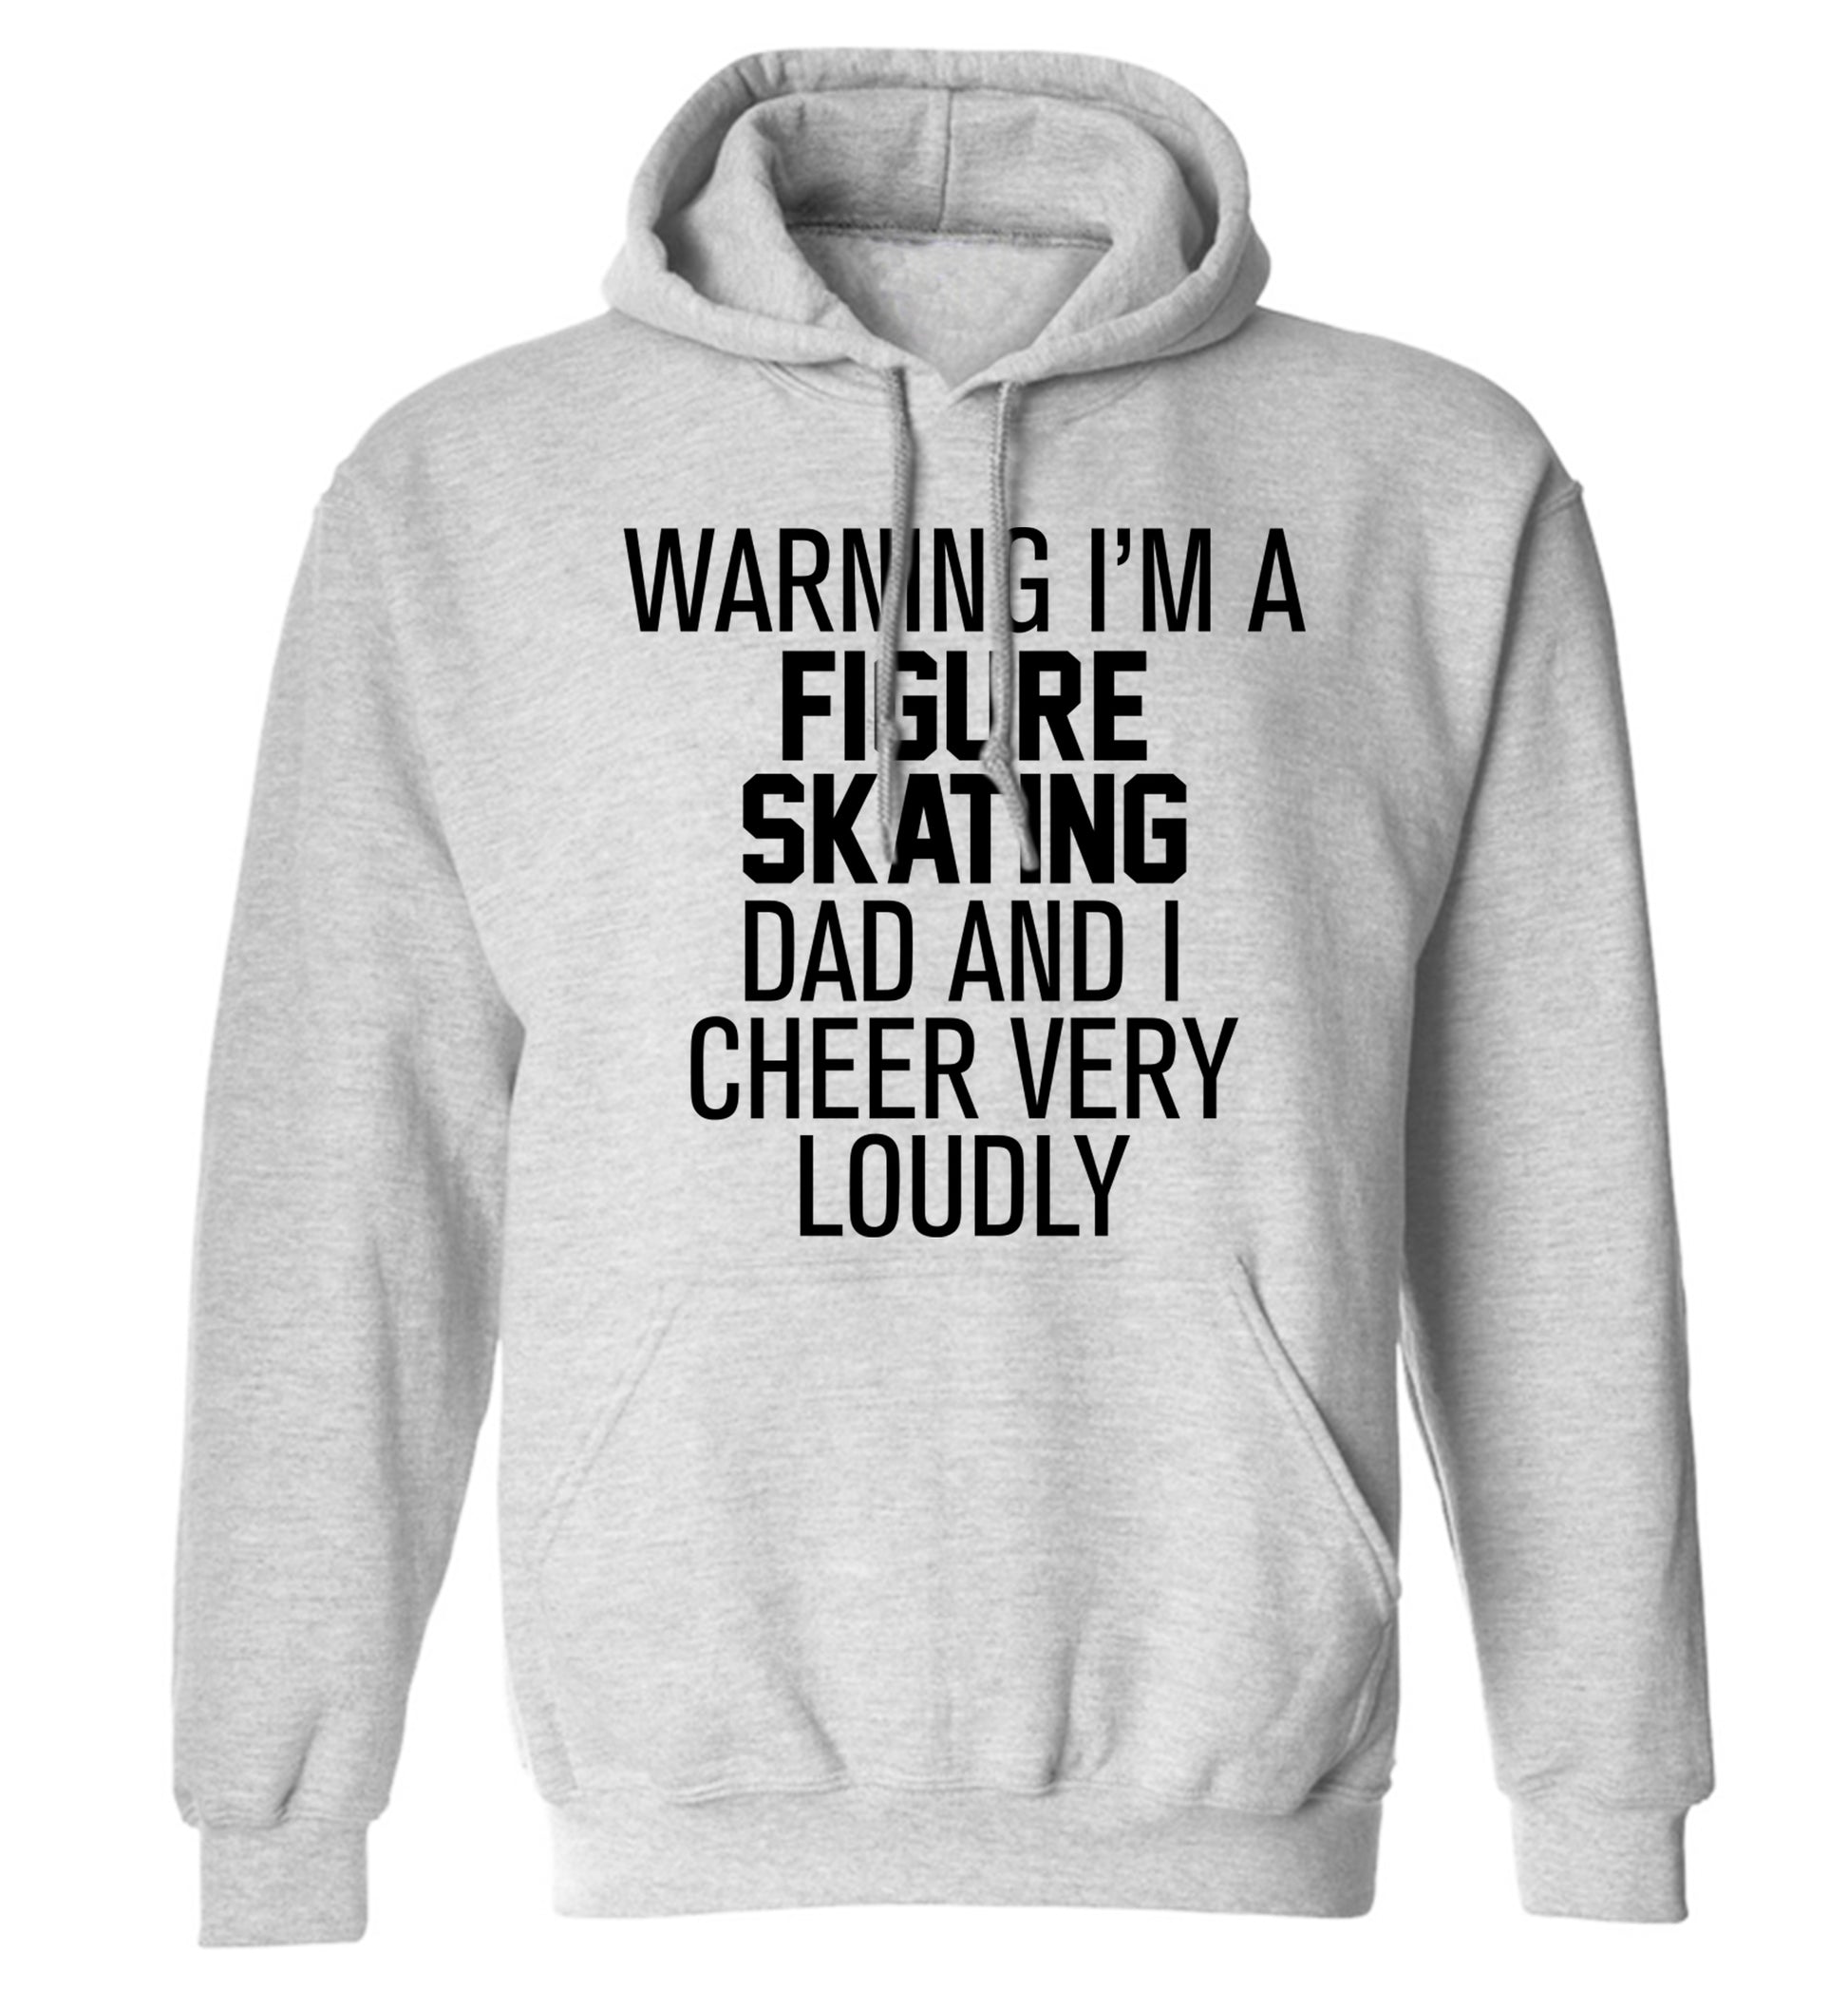 Warning I'm a figure skating dad and I cheer very loudly adults unisexgrey hoodie 2XL